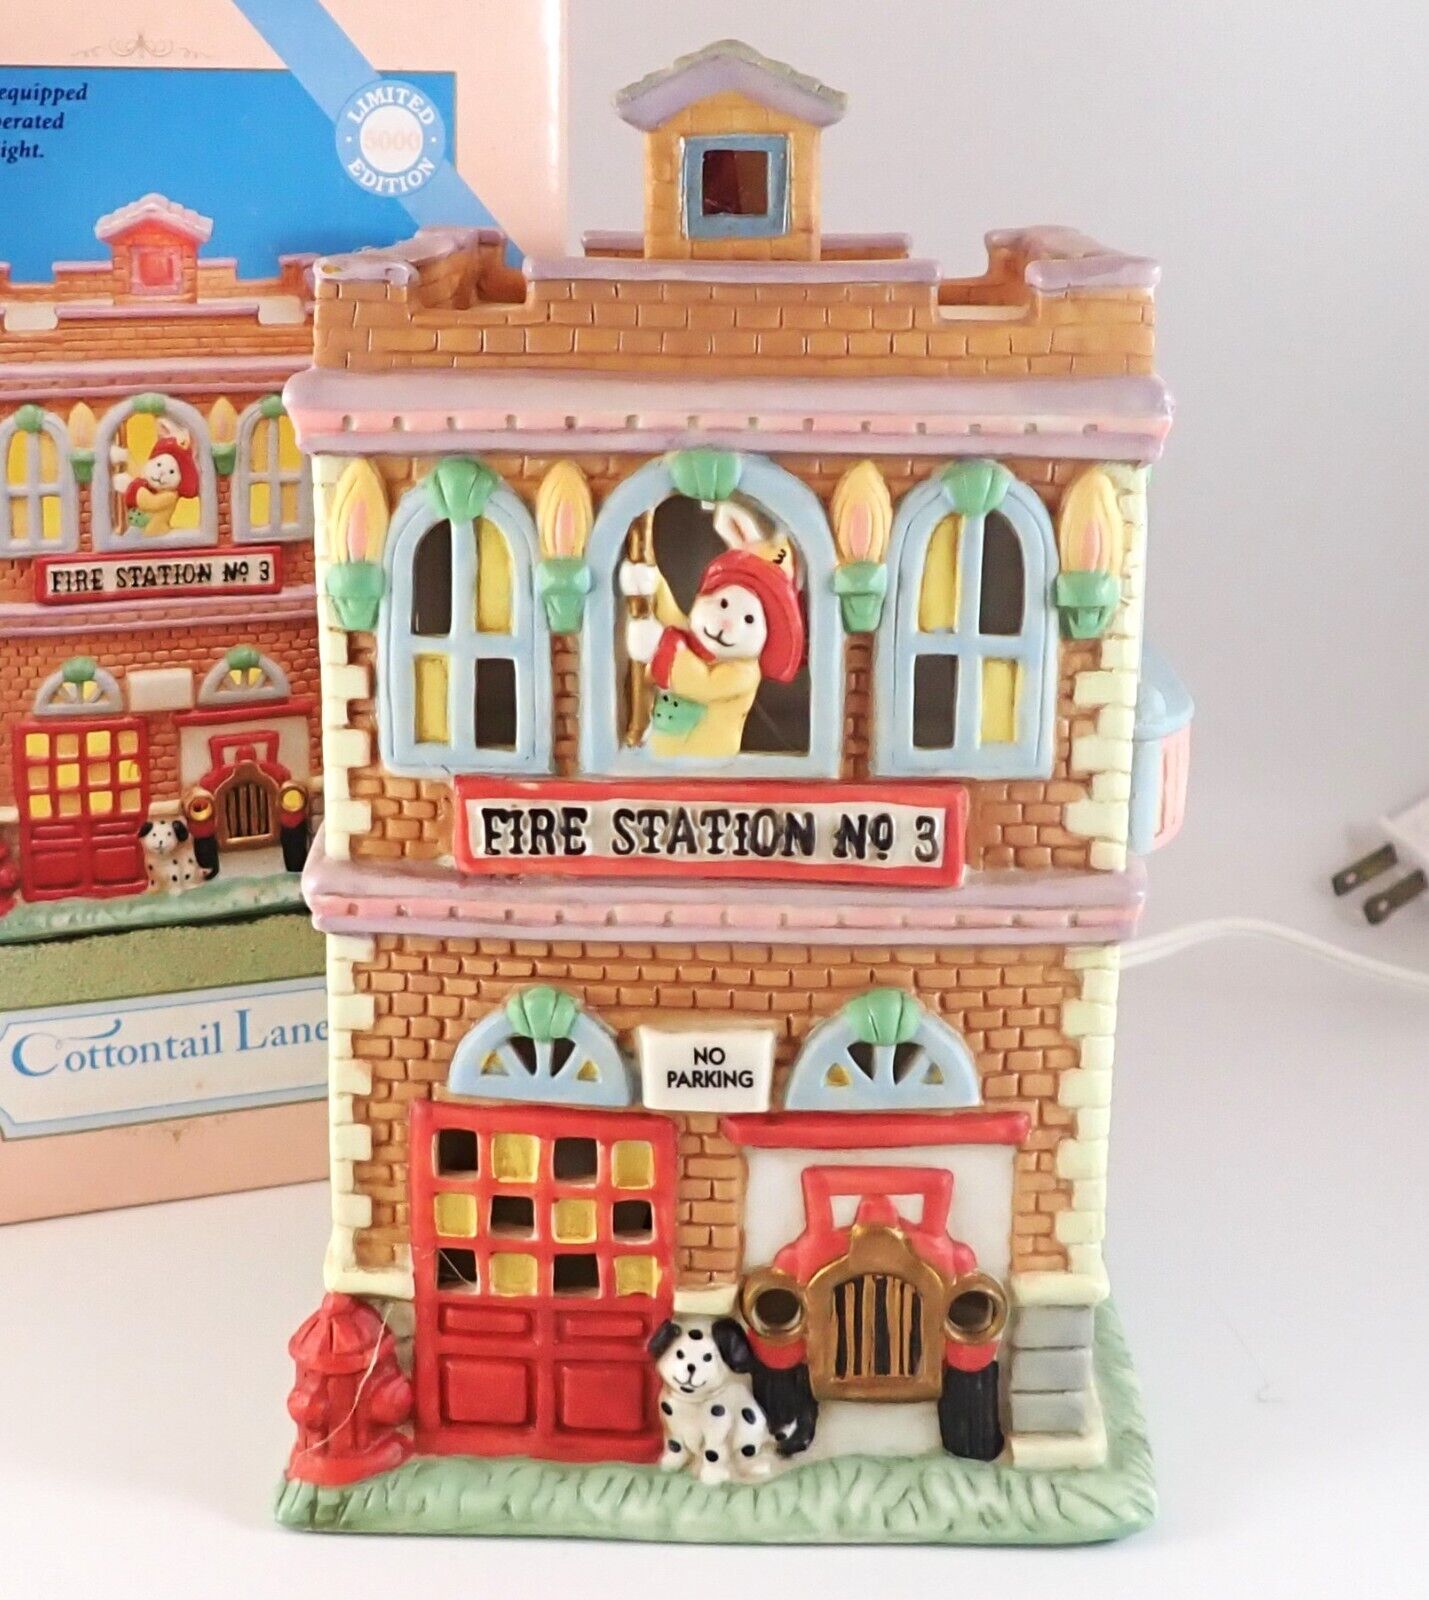 Cottontail Lane Fire Station No. 3 Midwest of Cannon Falls NOS Lighted Easter